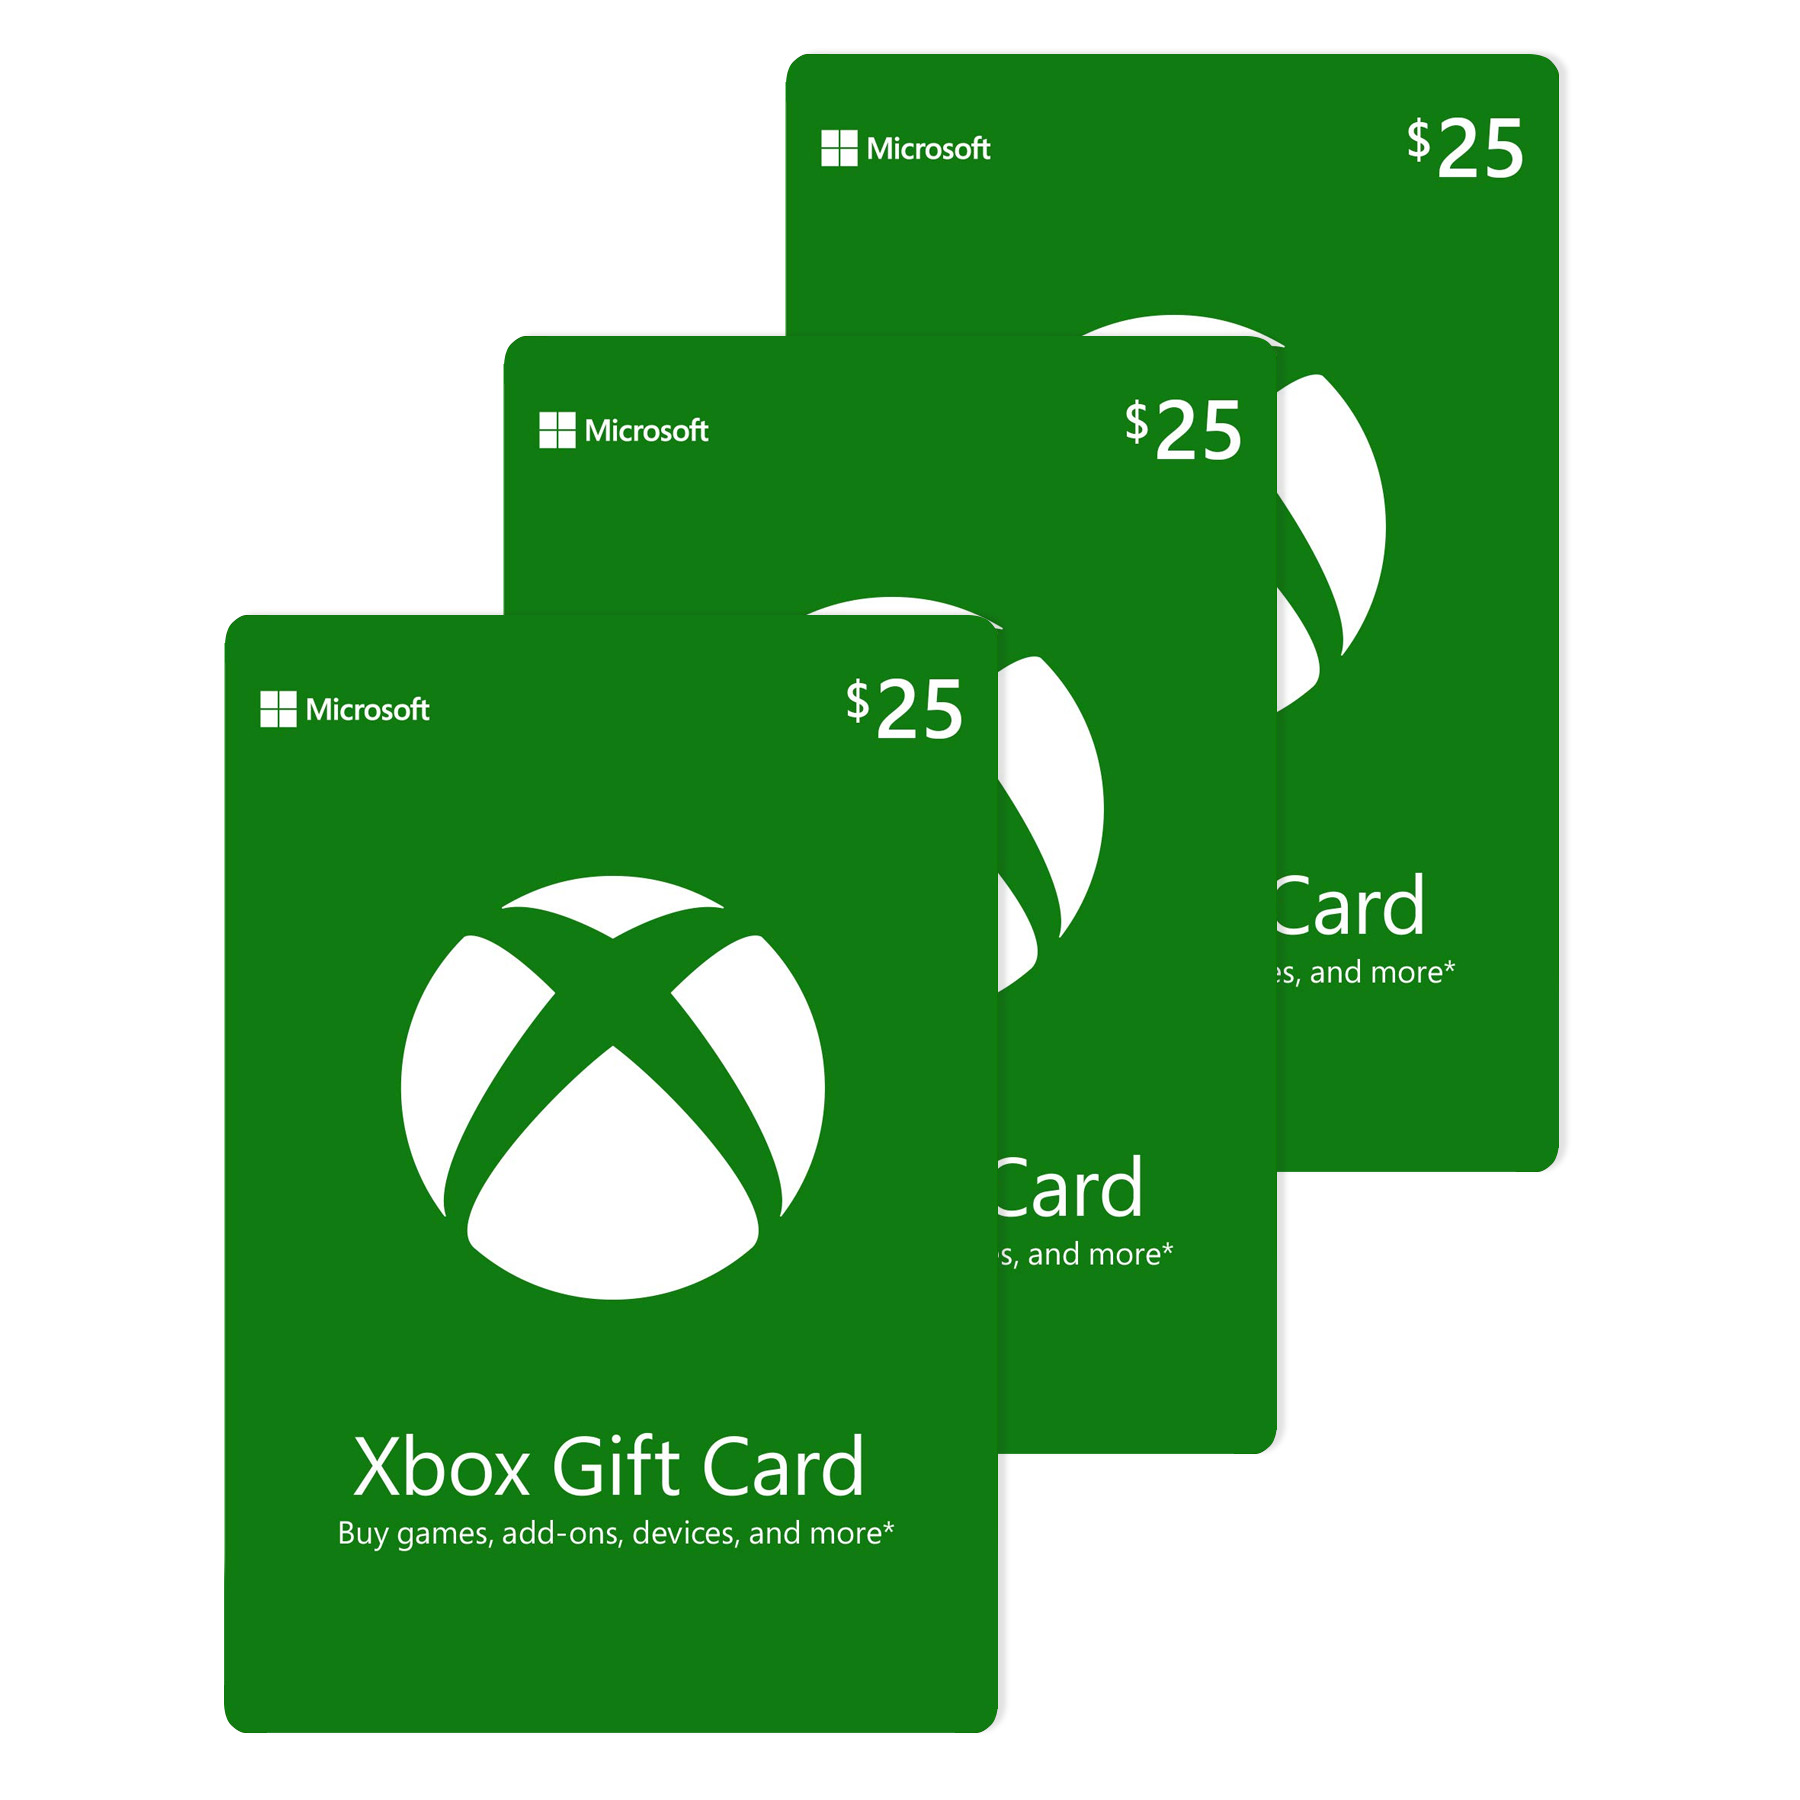 Microsoft XBOX Physical Gift Cards $75.00 Multi-Pack ( 3 x $25.00